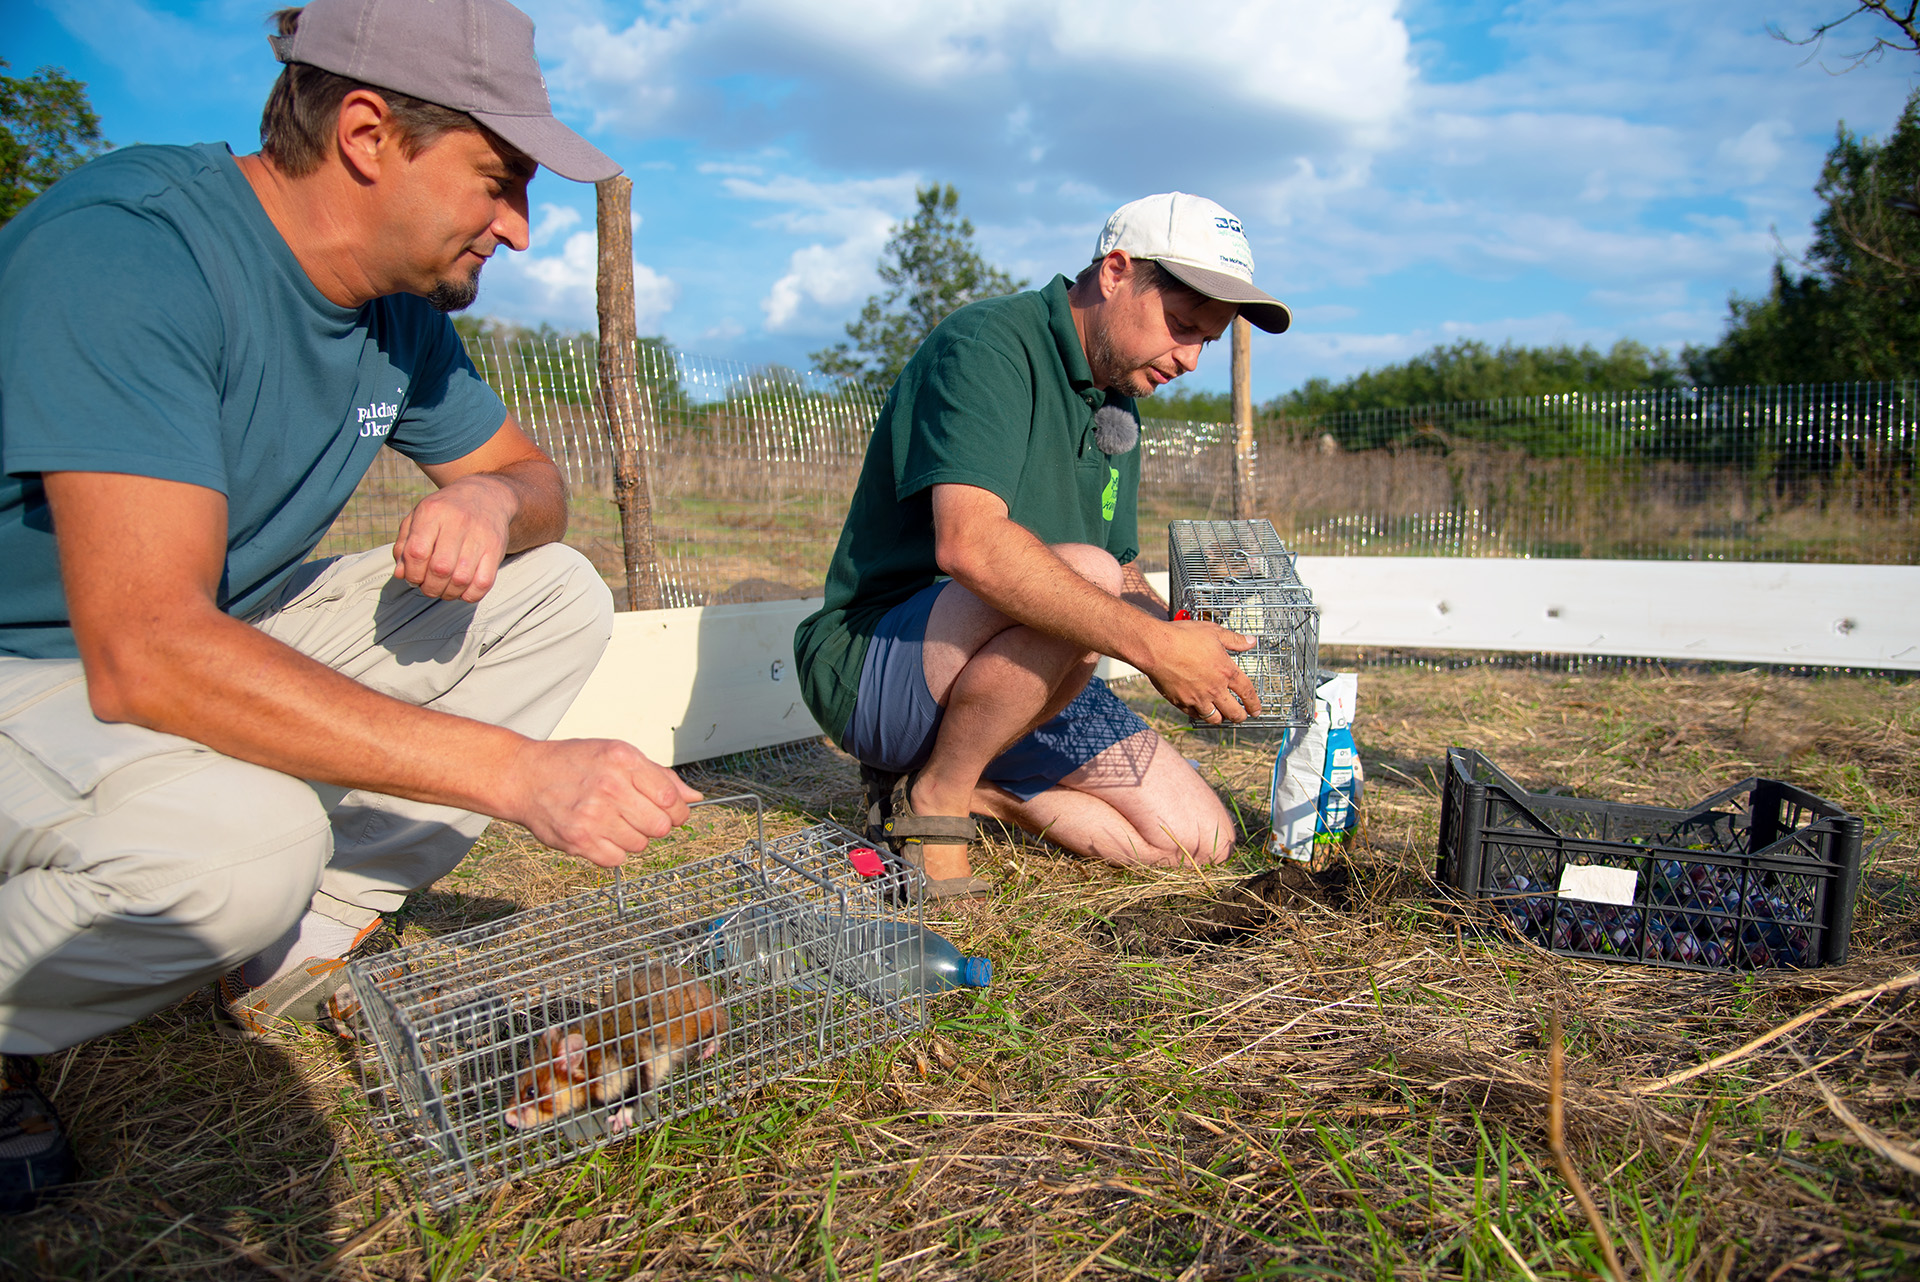 Wild hamsters are released by the Rewilding Ukraine team, who are part of the ERN, on the Tarutino Steppe, in the Ukrainian part of the Danube Delta rewilding landscape.